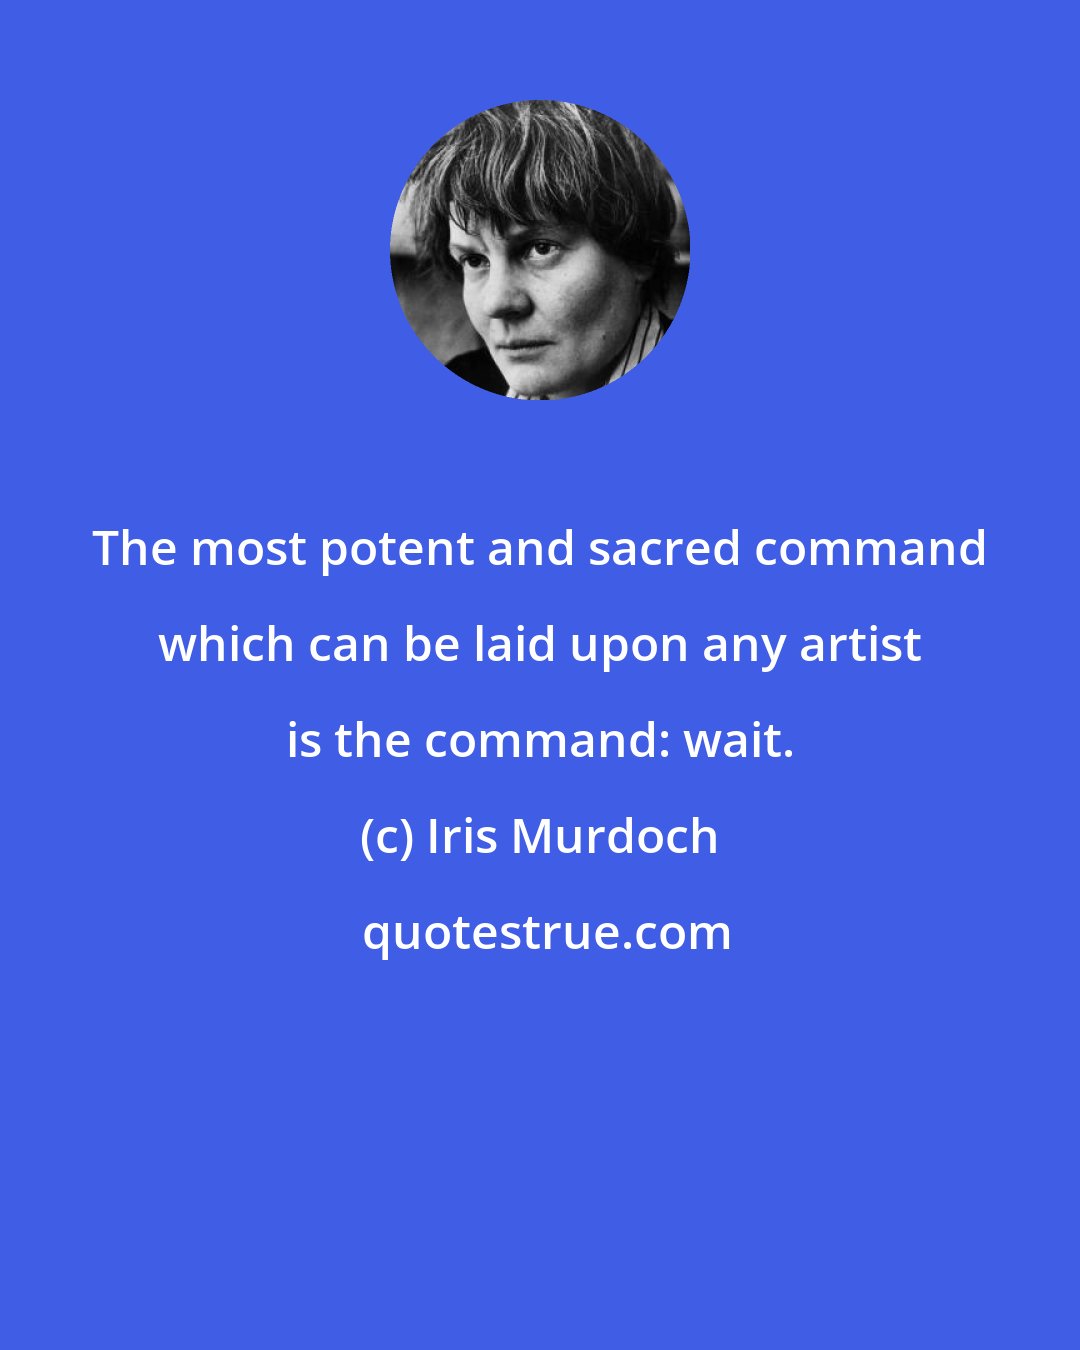 Iris Murdoch: The most potent and sacred command which can be laid upon any artist is the command: wait.